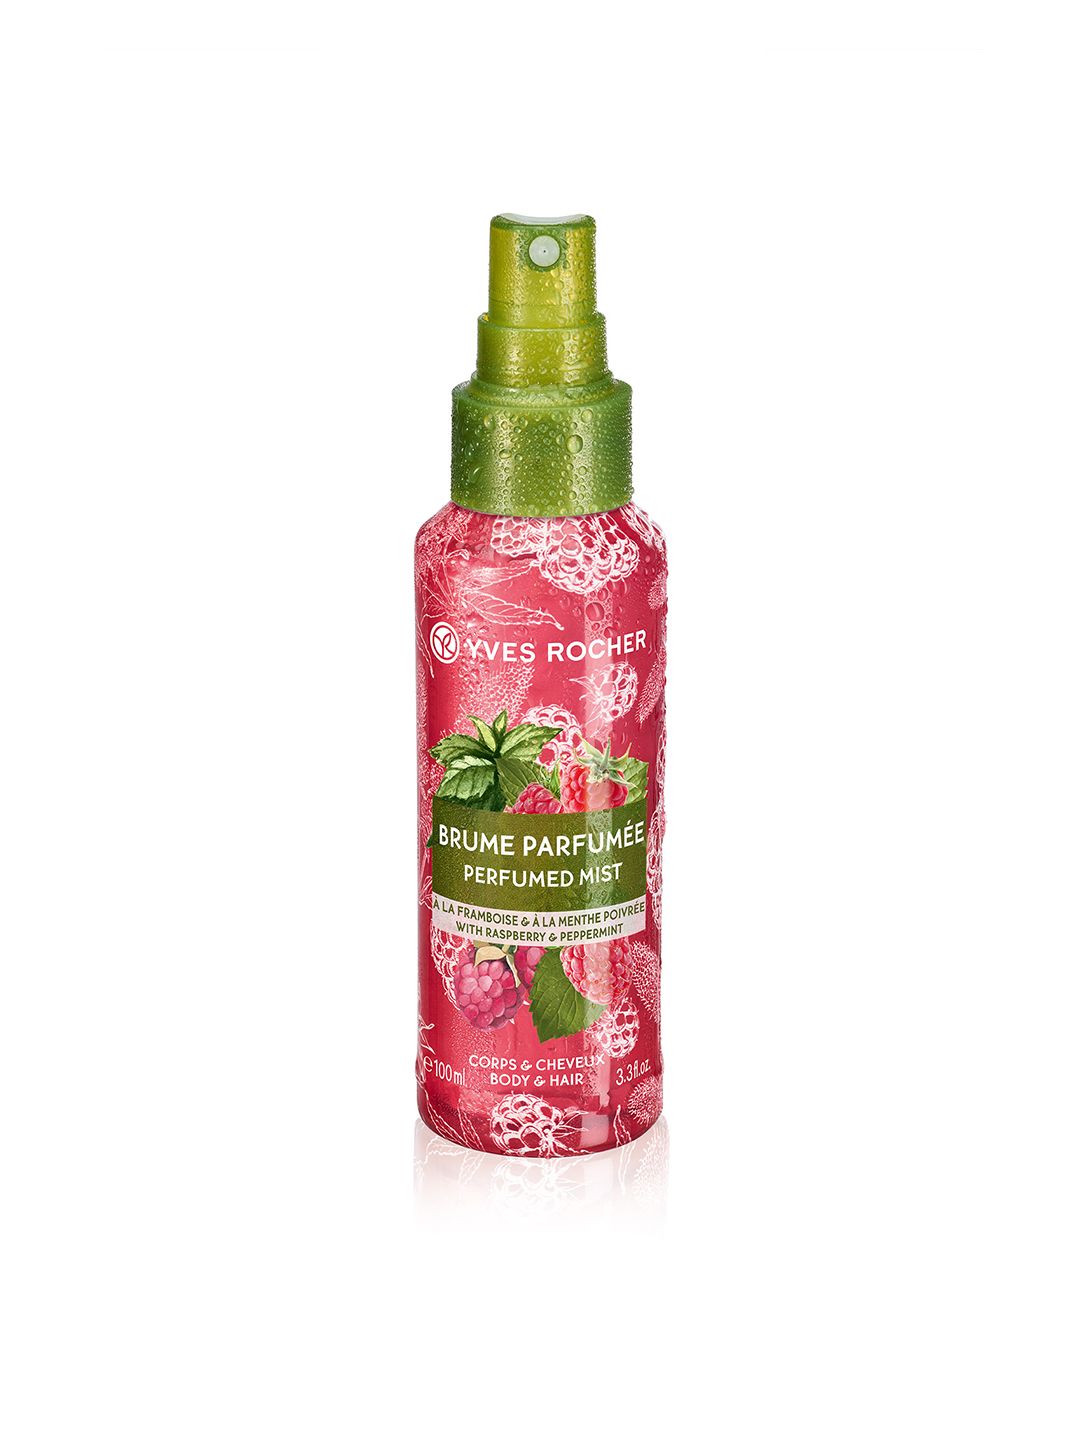 Yves Rocher Raspberry & Peppermint Perfumed Sustainable Body & Hair Mist 100ml Price in India